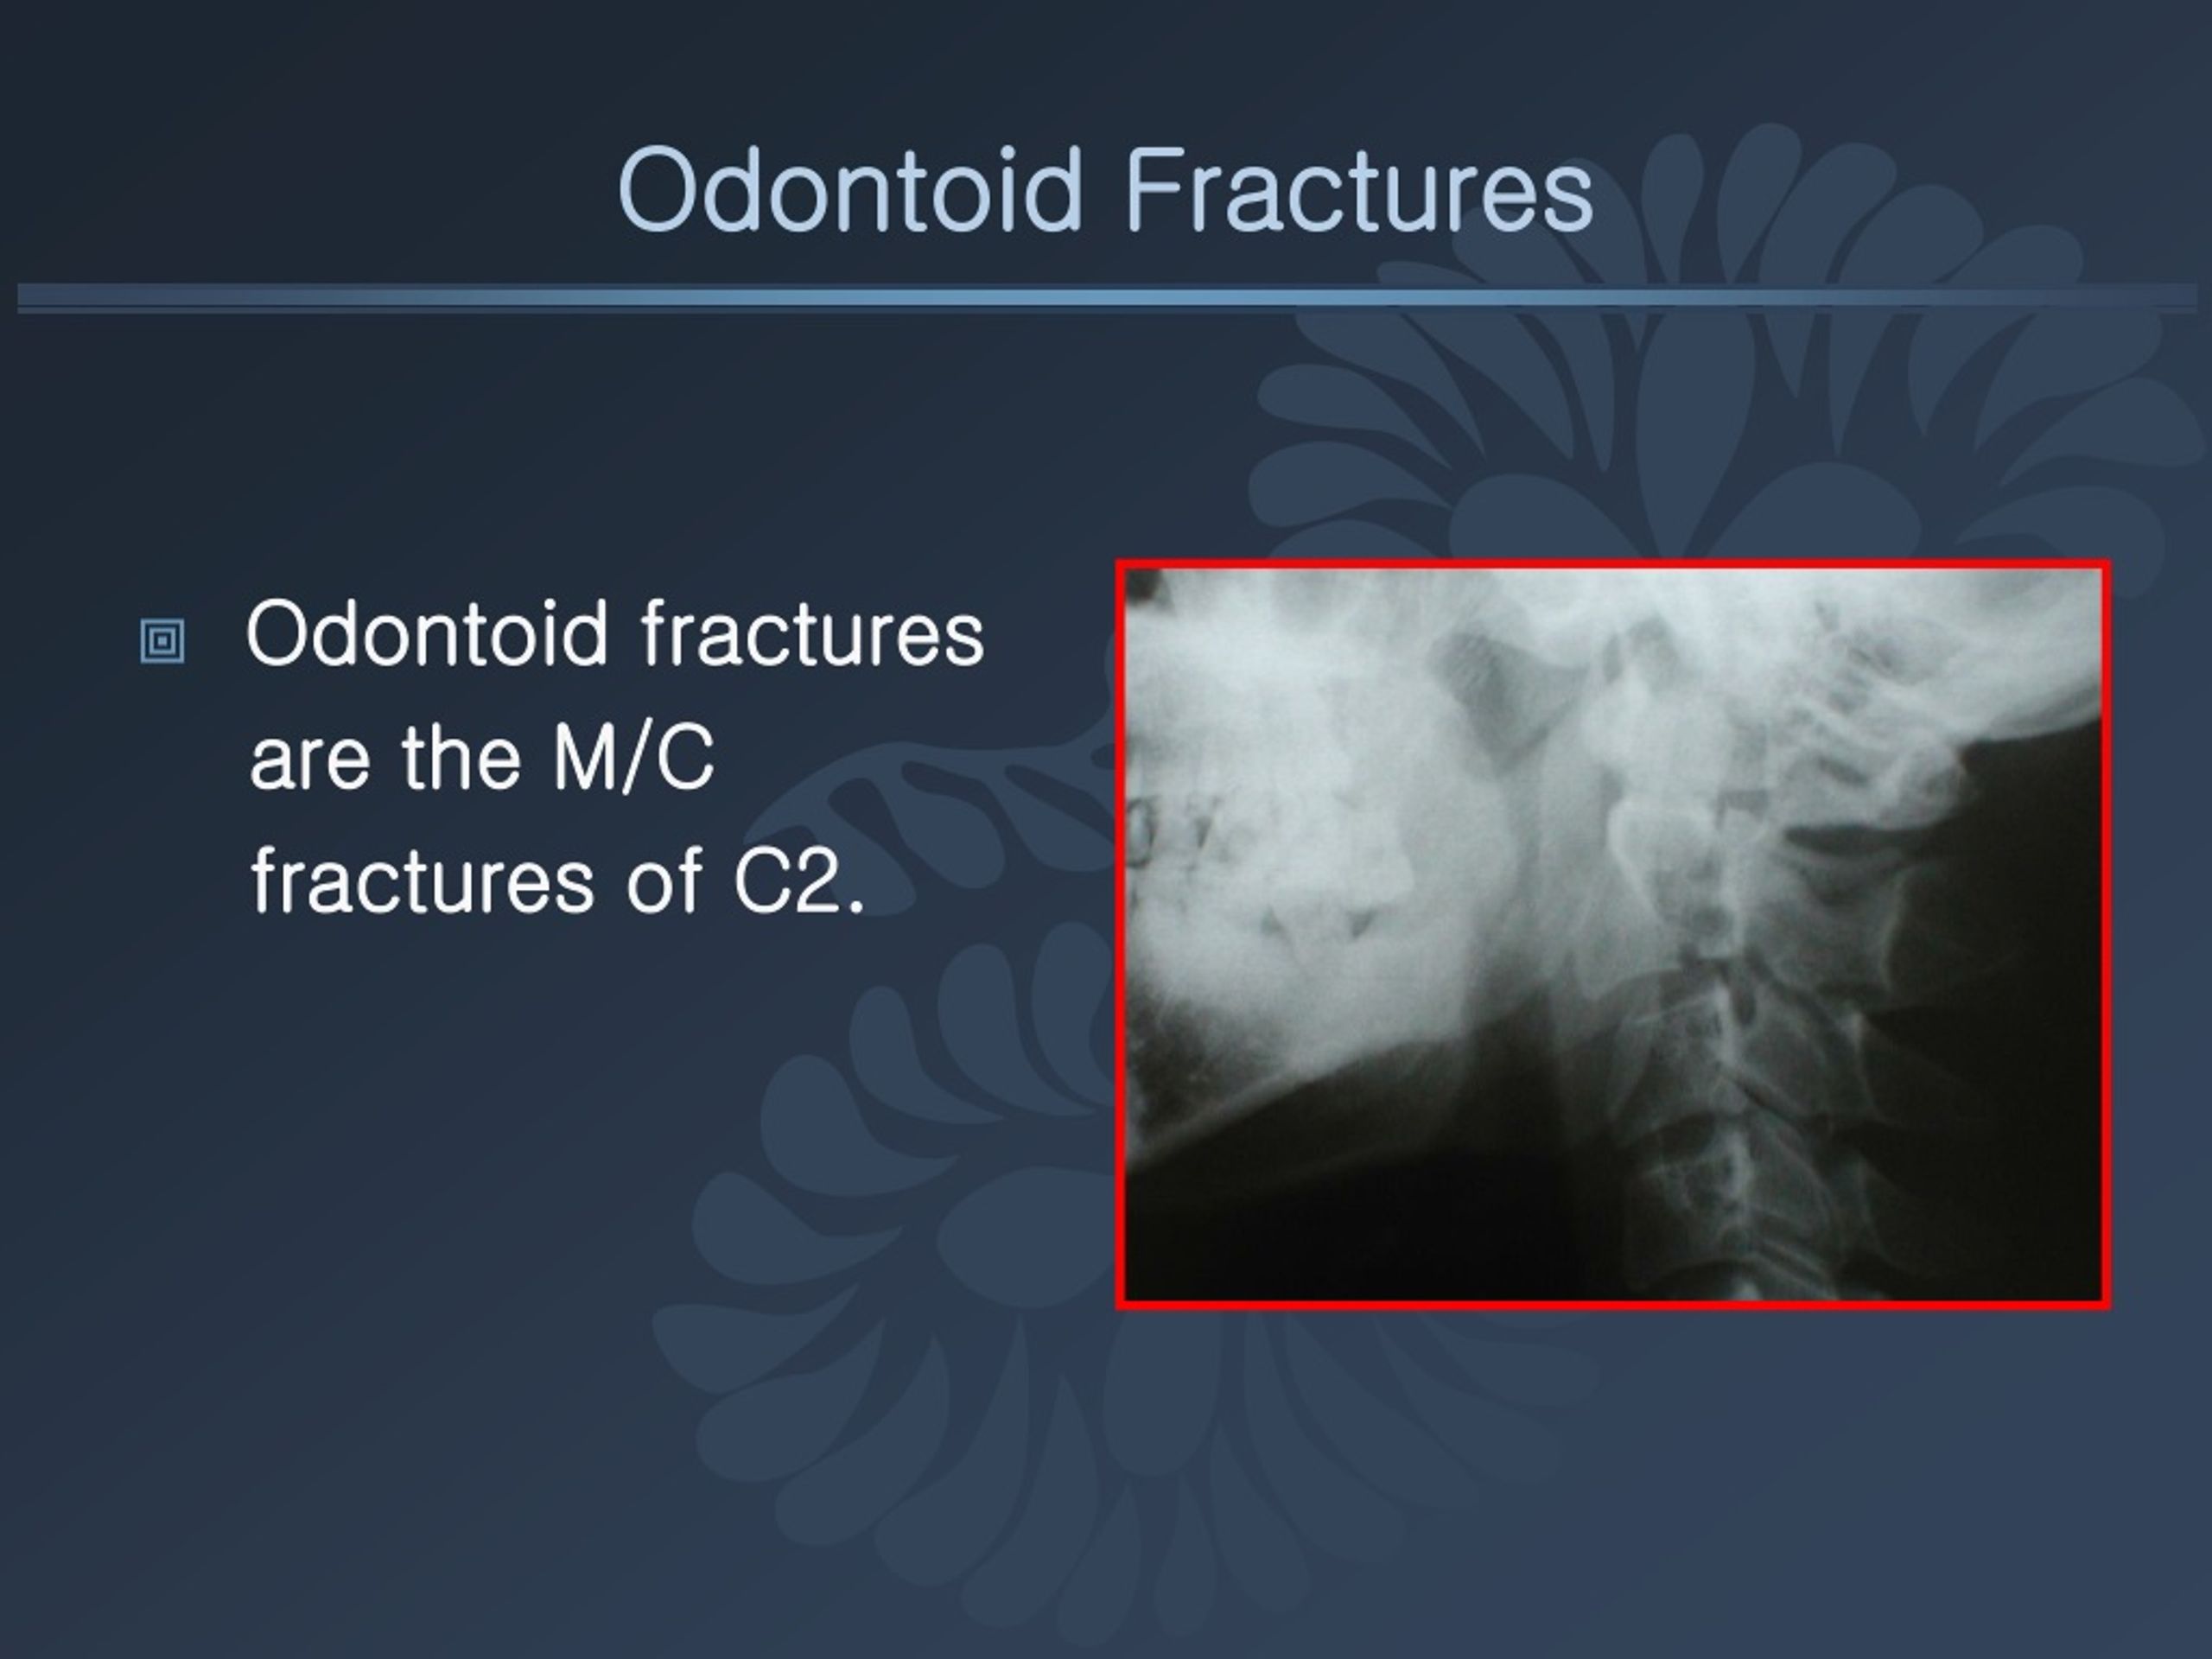 icd10 diagnosis for odontoid fracture type 2